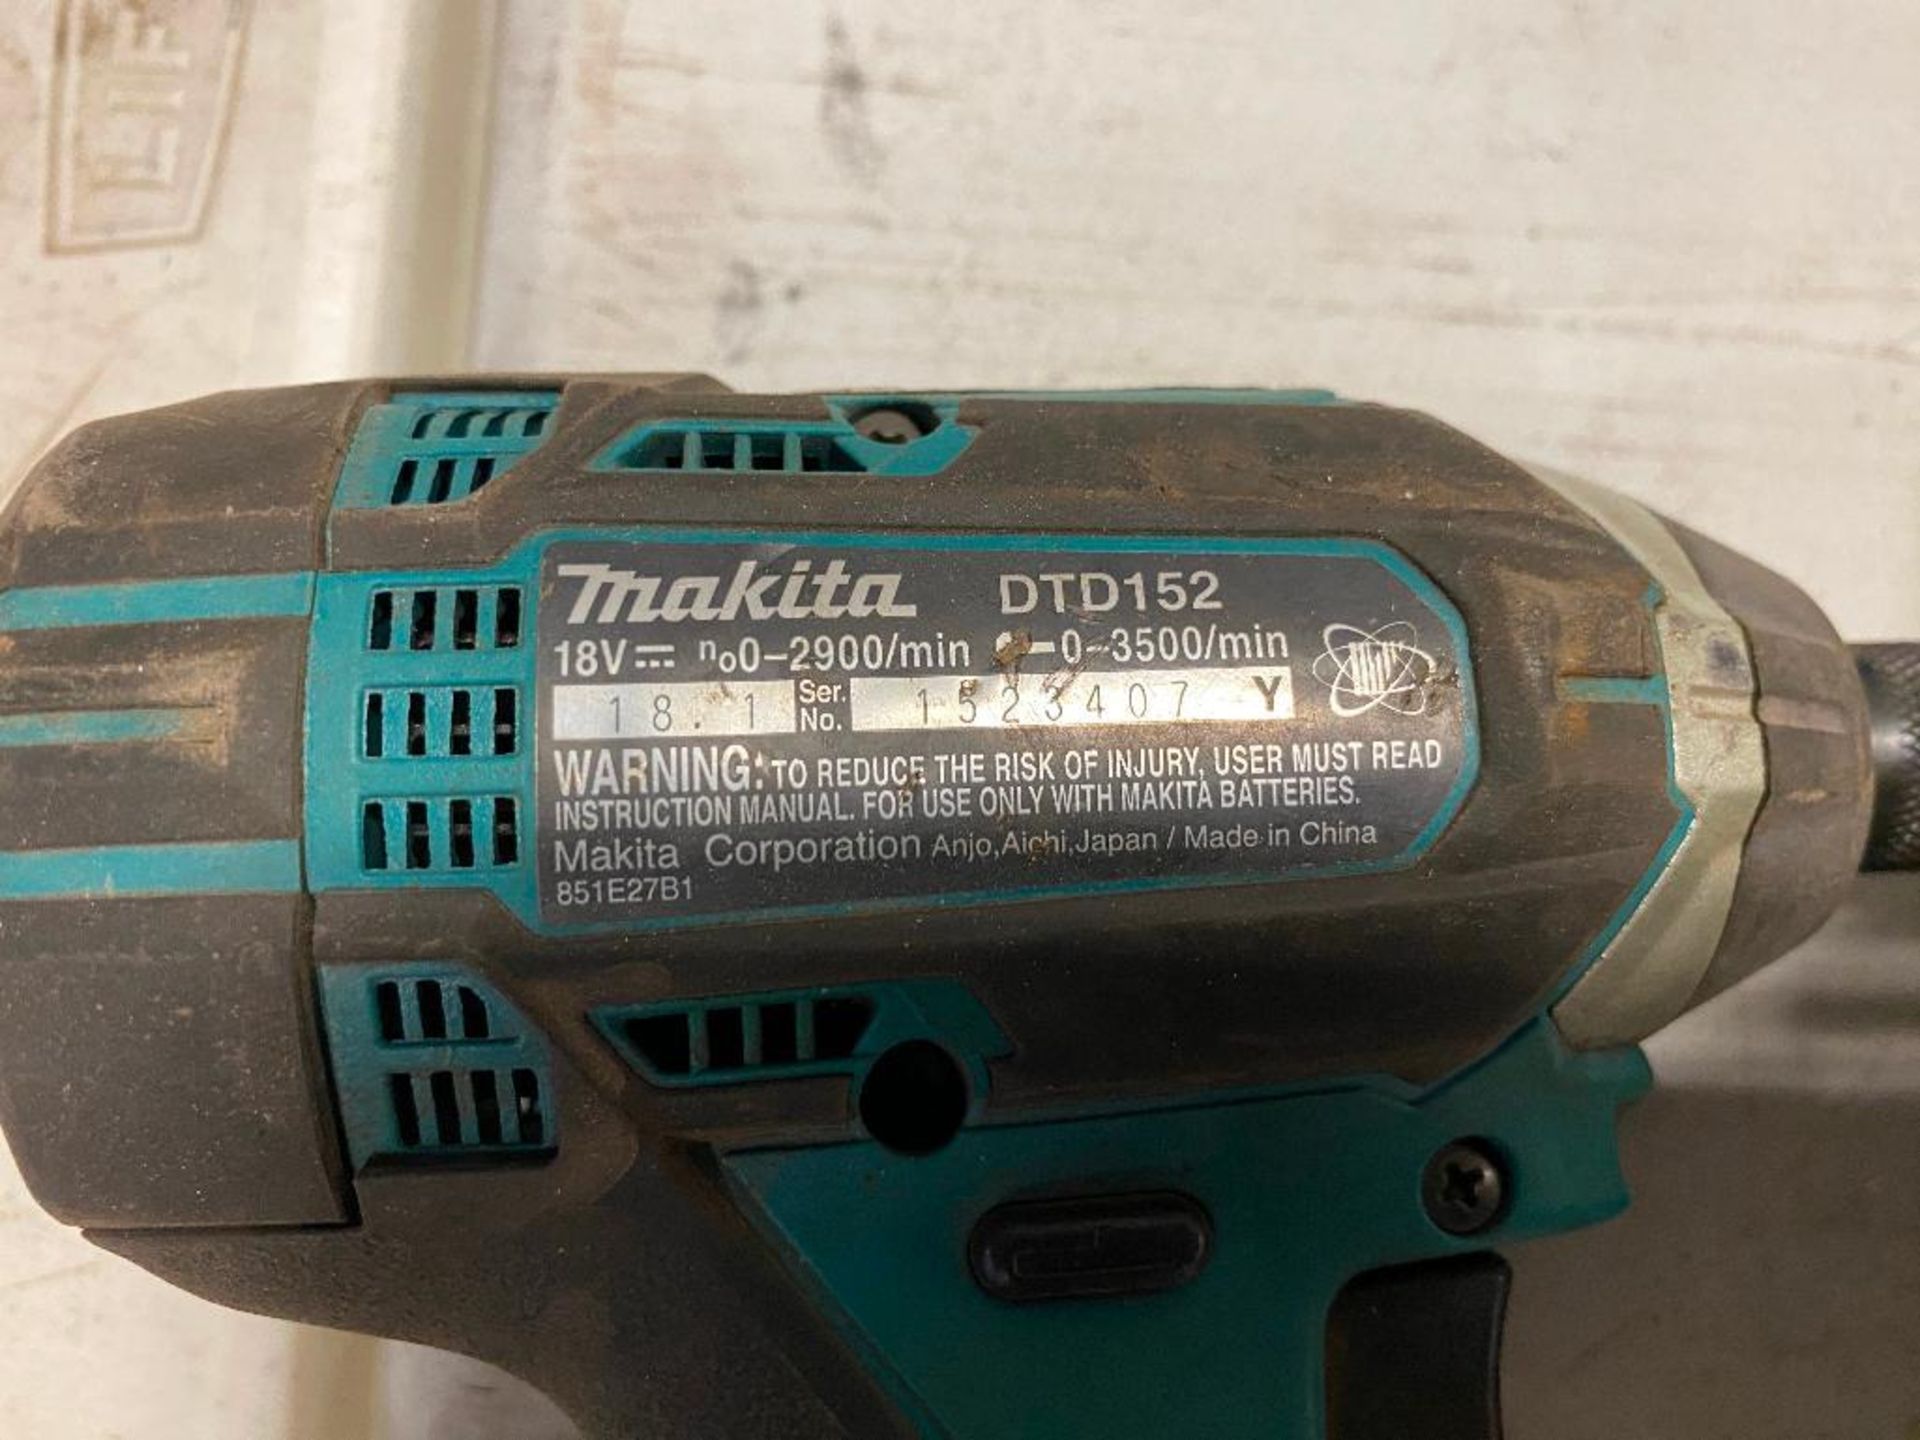 Makita DTD152 18V Cordless Impact w/ Battery and Charger - Image 2 of 3